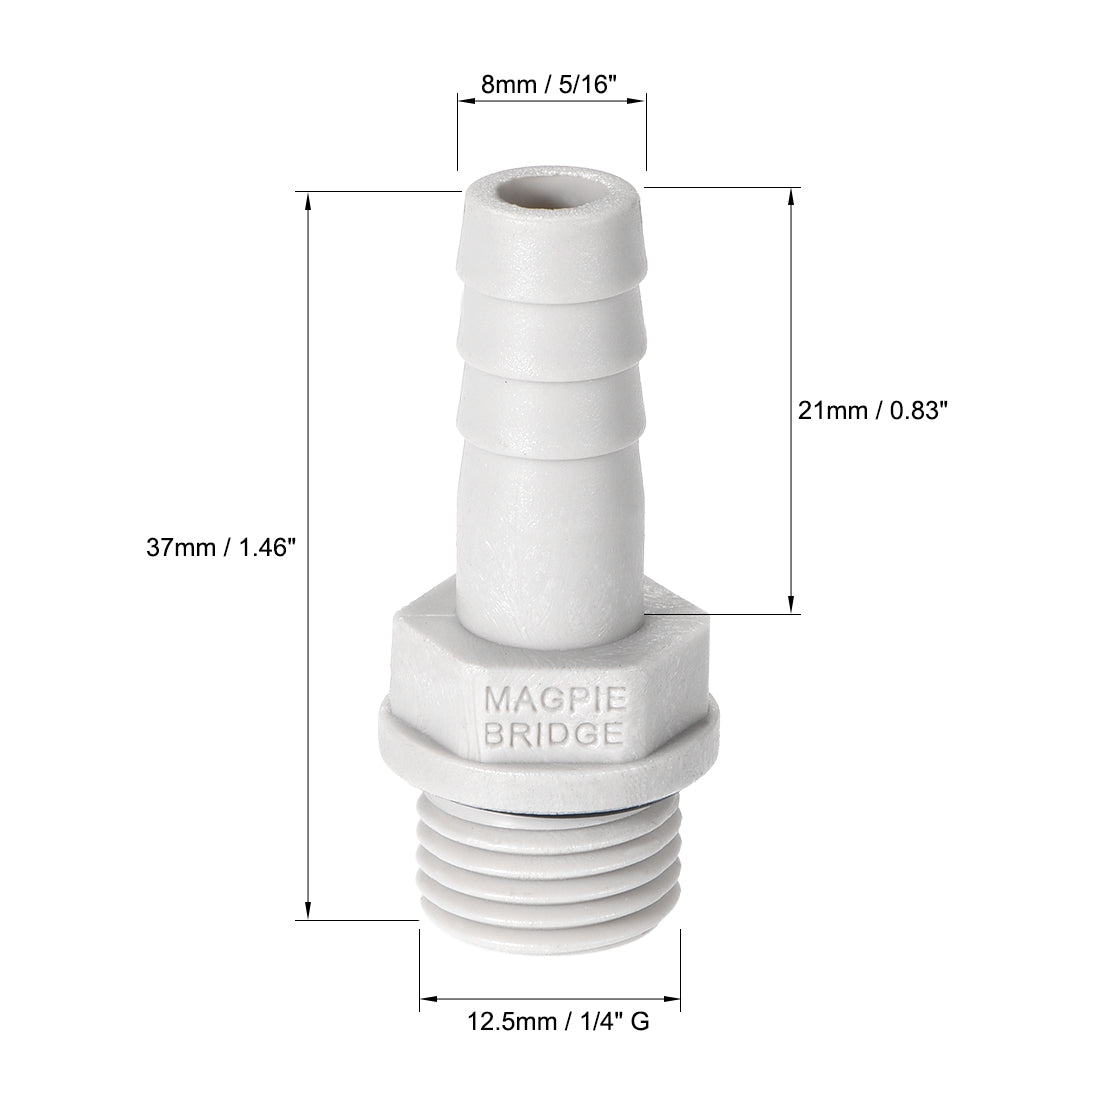 Uxcell Uxcell PVC Barb Hose Fitting Connector Adapter 6mm or 15/64" Barbed x 1/4" G Male Pipe 5pcs